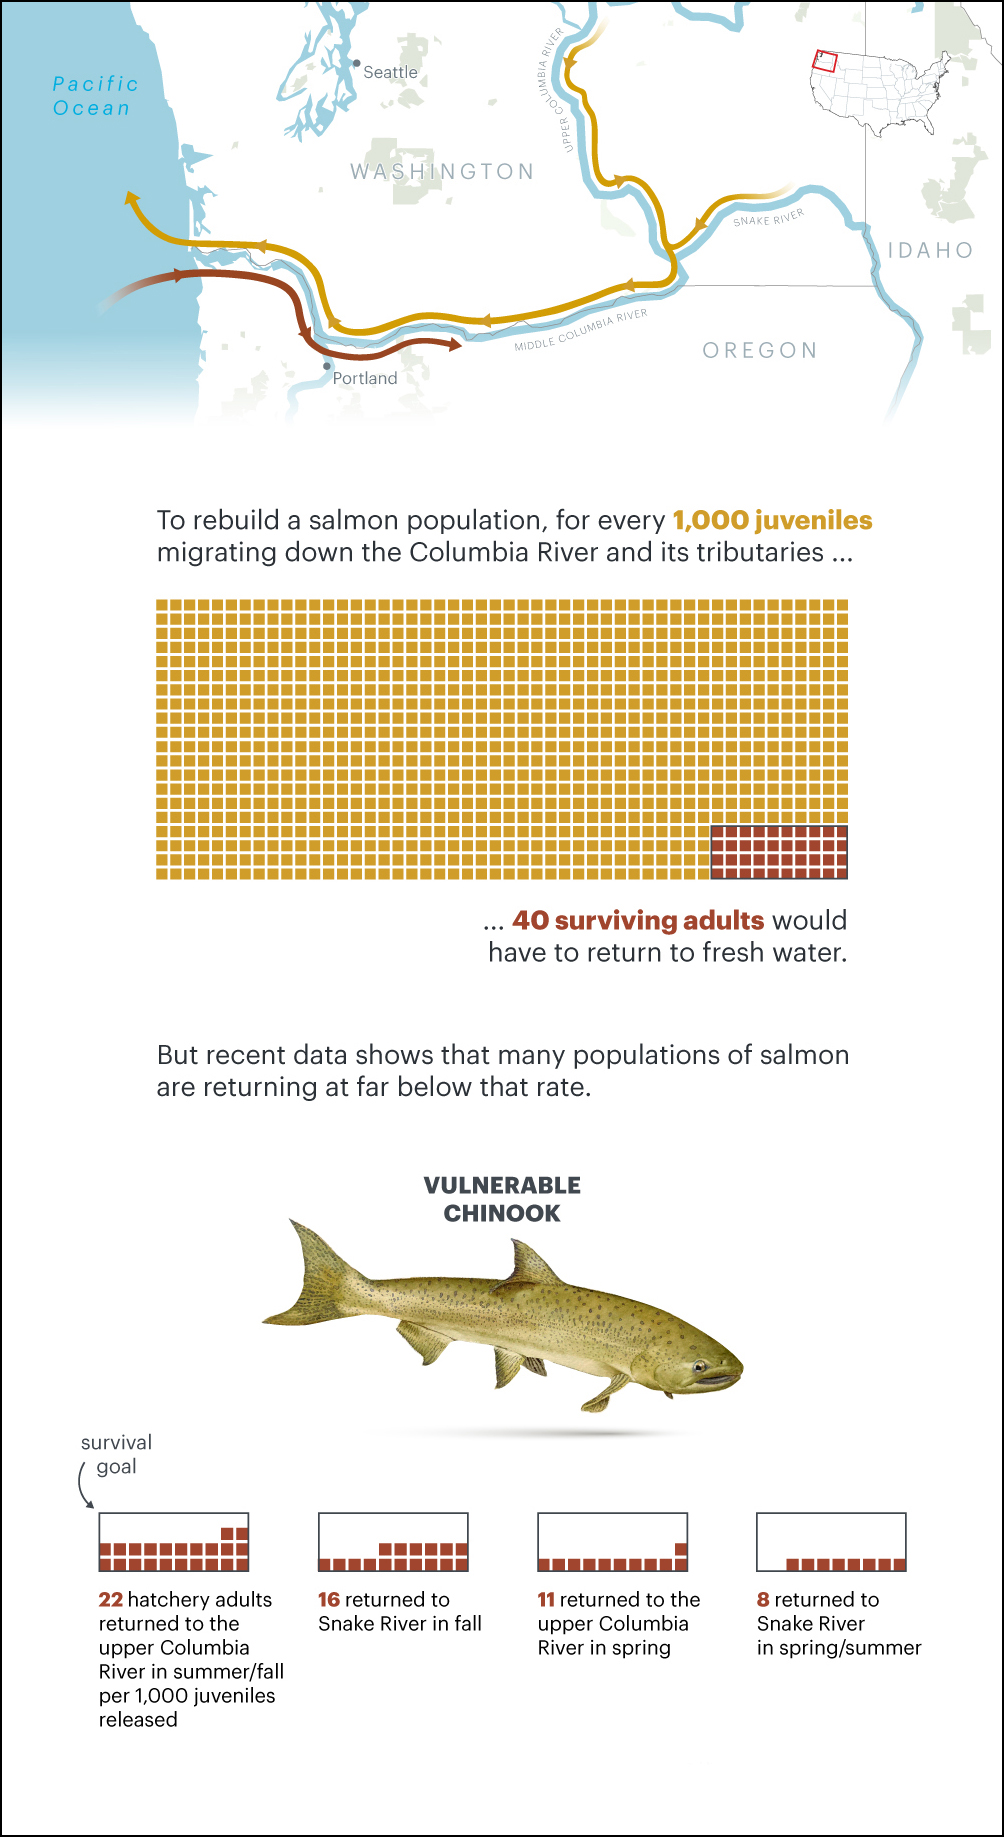 Note: Survival rates are for four vulnerable populations of Chinook salmon that were released from hatcheries between 2014 and 2018, the most recent years for which complete data is available. Source: Columbia Basin Research estimates, map data (c) OpenStreetMap contributors.